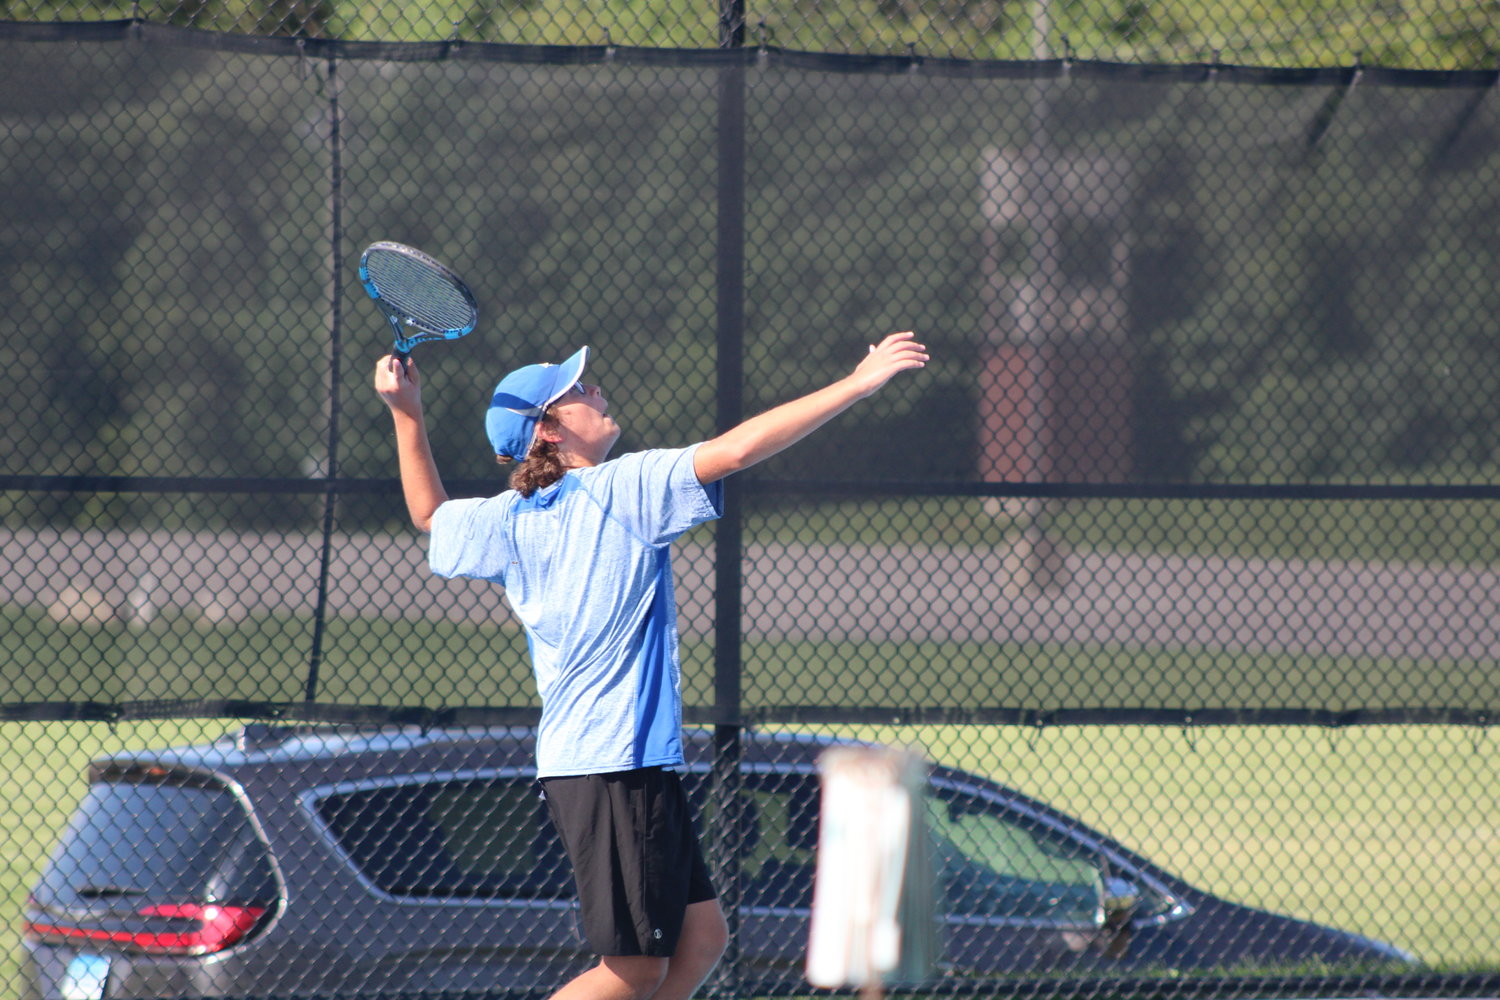 Junior James Murphy picked up one of the two wins for CHS at one singles.